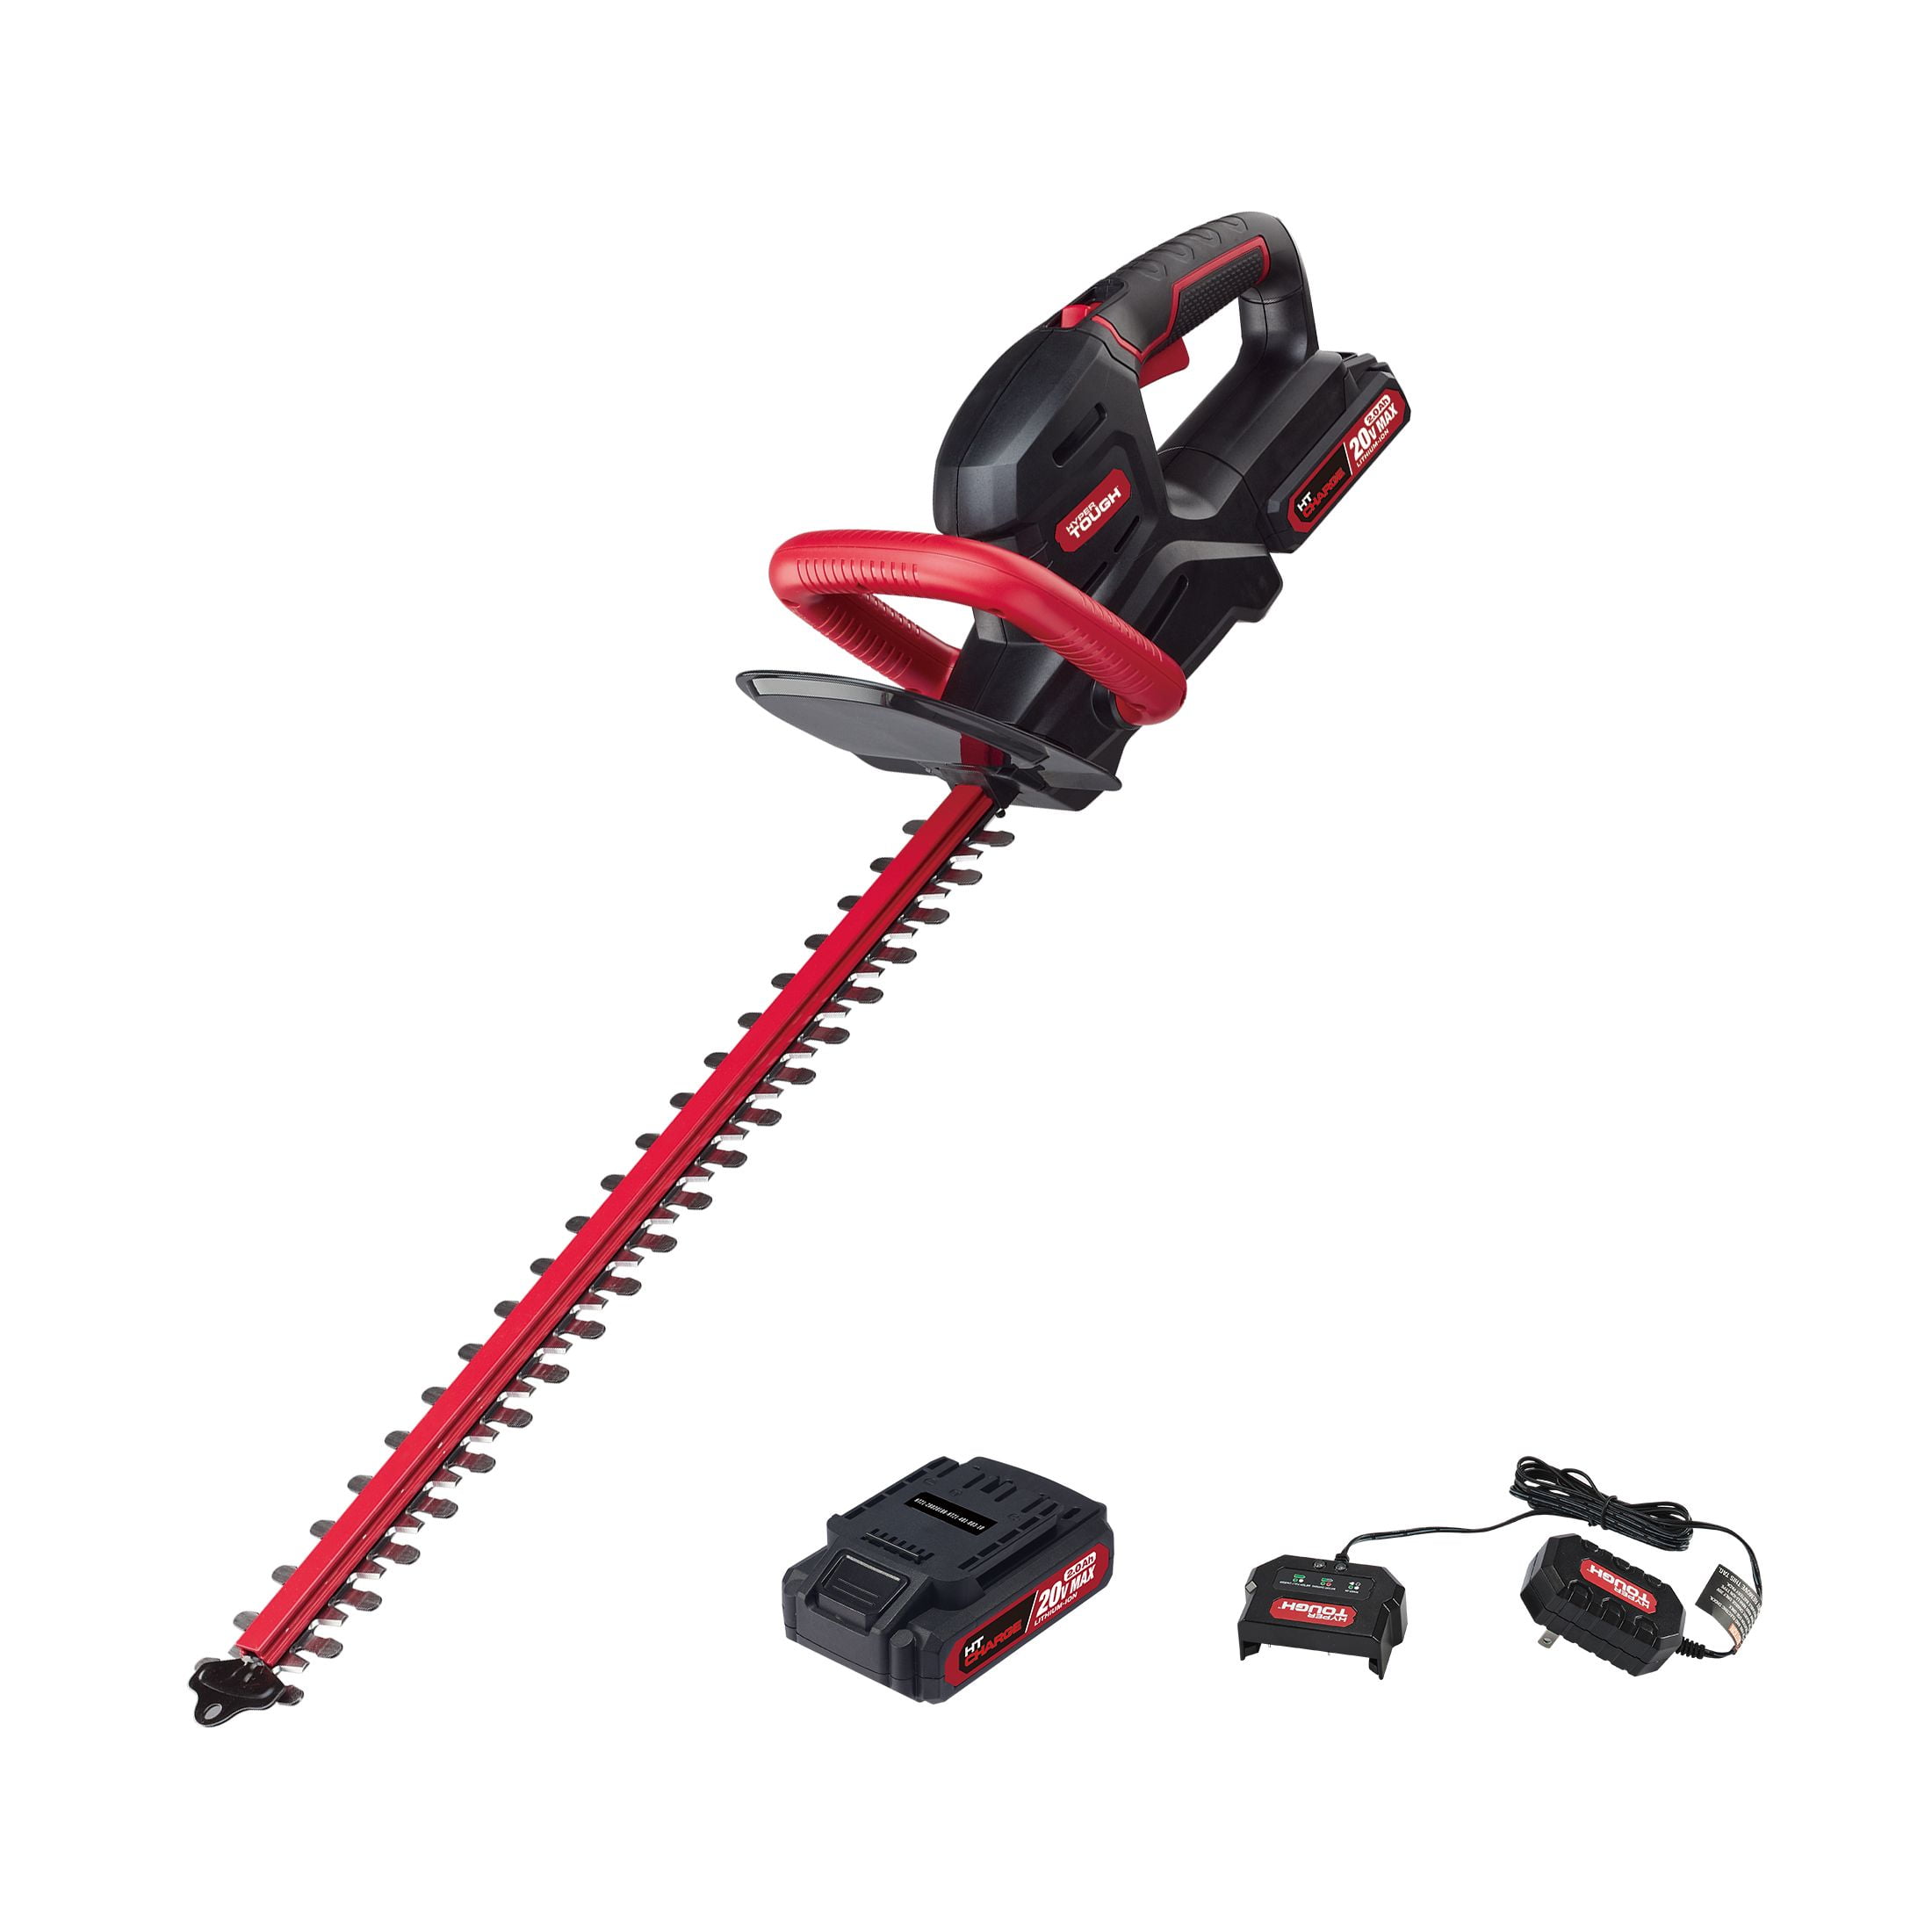 Hyper Tough 20V Max 22-inch Cordless Battery Powered Hedge Trimmer,  HT21-401-003-07 